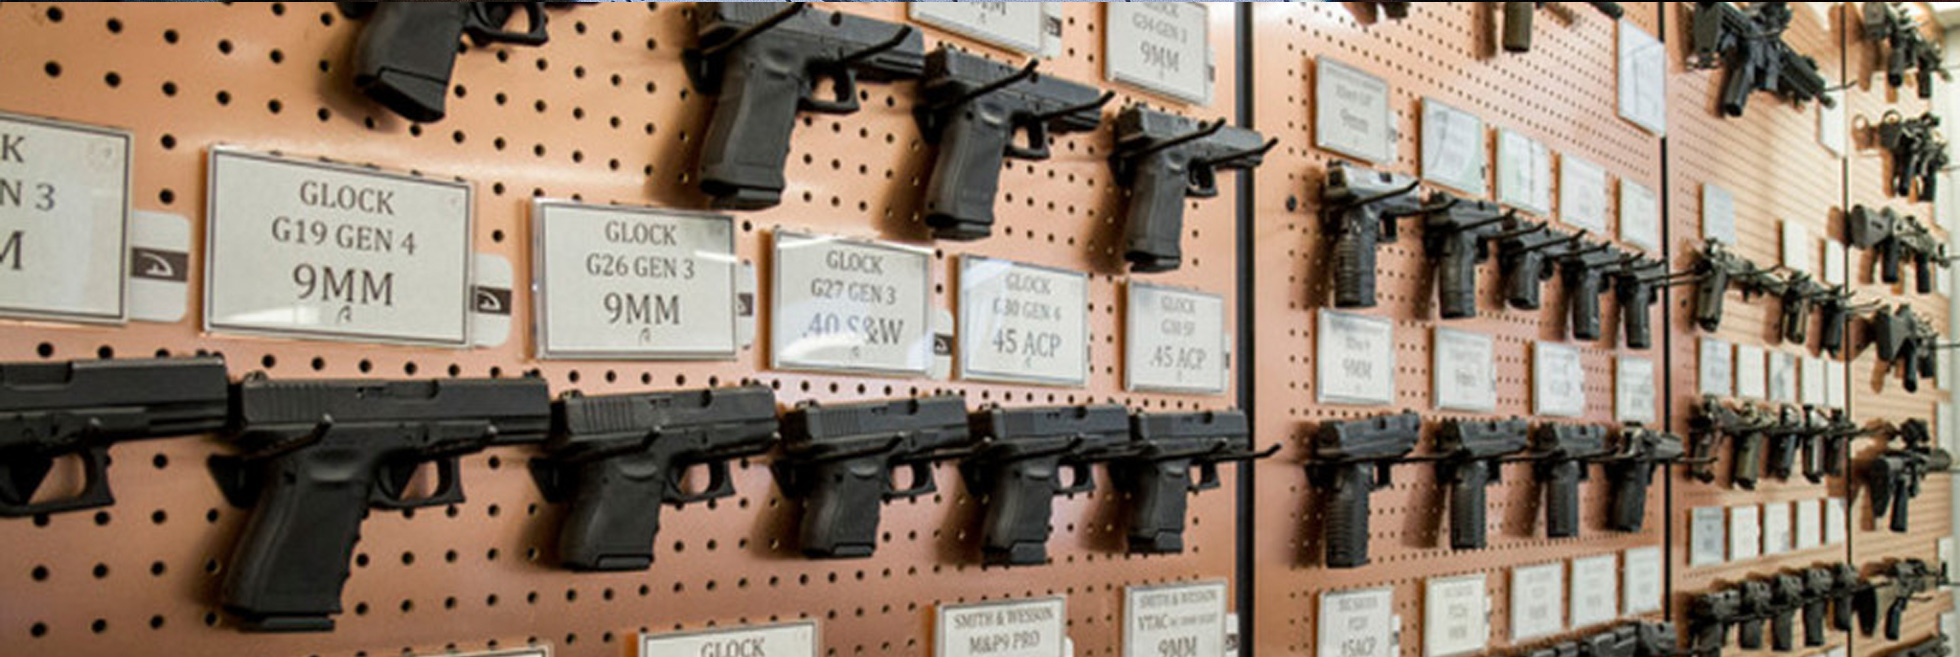 Firearm rentals including pistols, shotguns, sporting rifles, and fully automatic machine guns